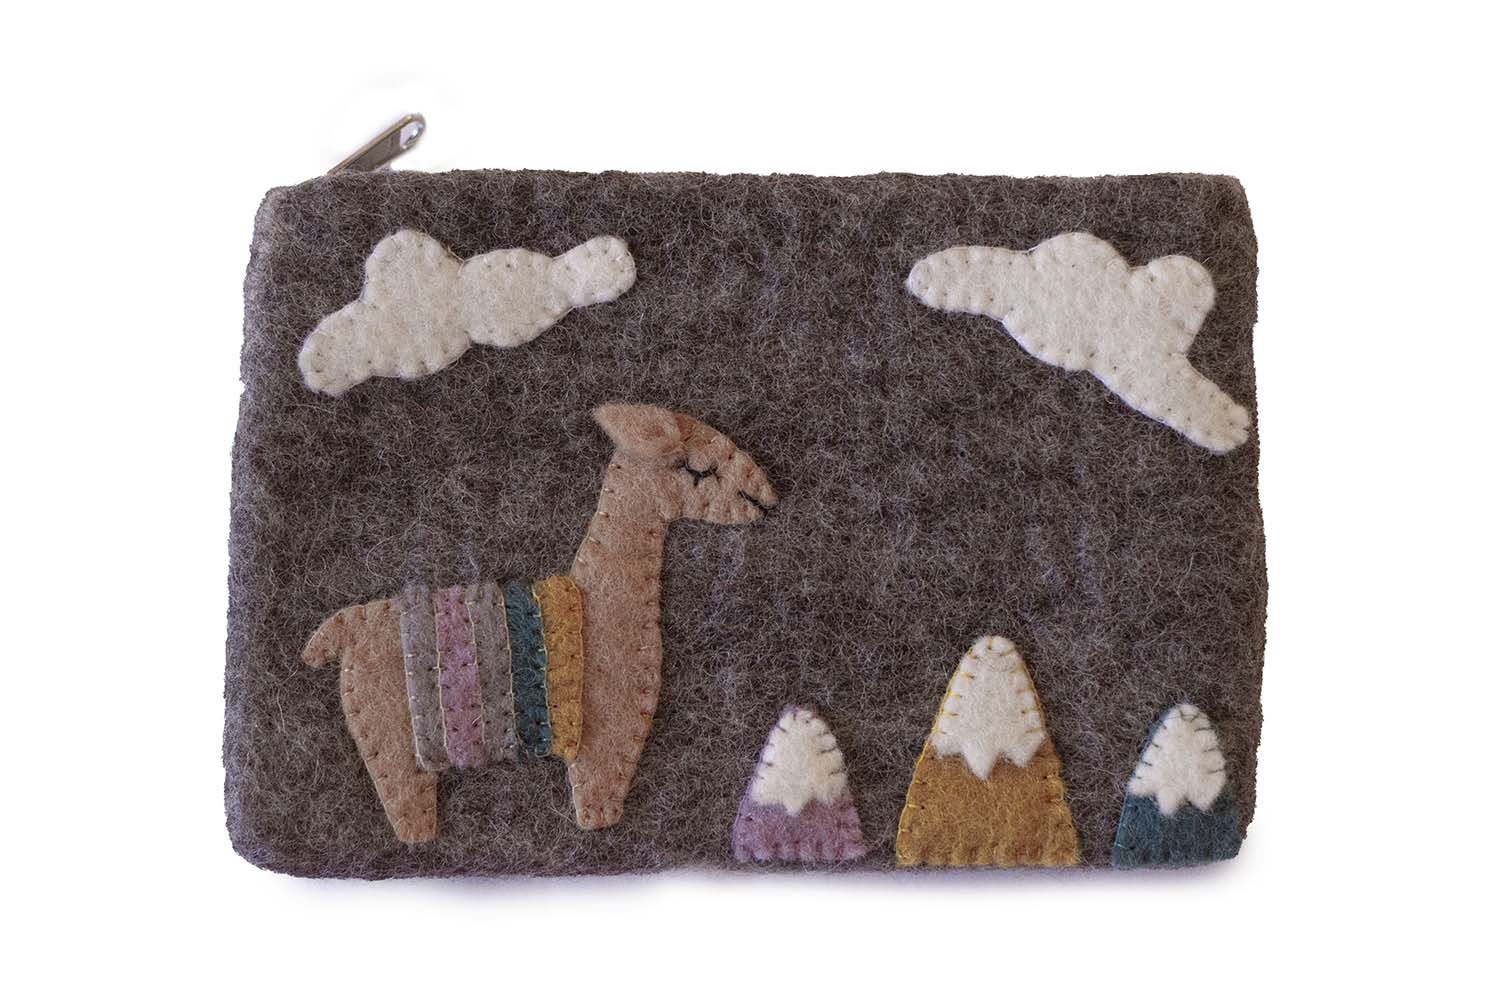 This Global Groove Life, handmade, ethical, fair trade, eco-friendly, sustainable, grey felt zipper coin pouch was created by artisans in Kathmandu Nepal and is adorned with an adorable Llama, mountain, and cloud motif.